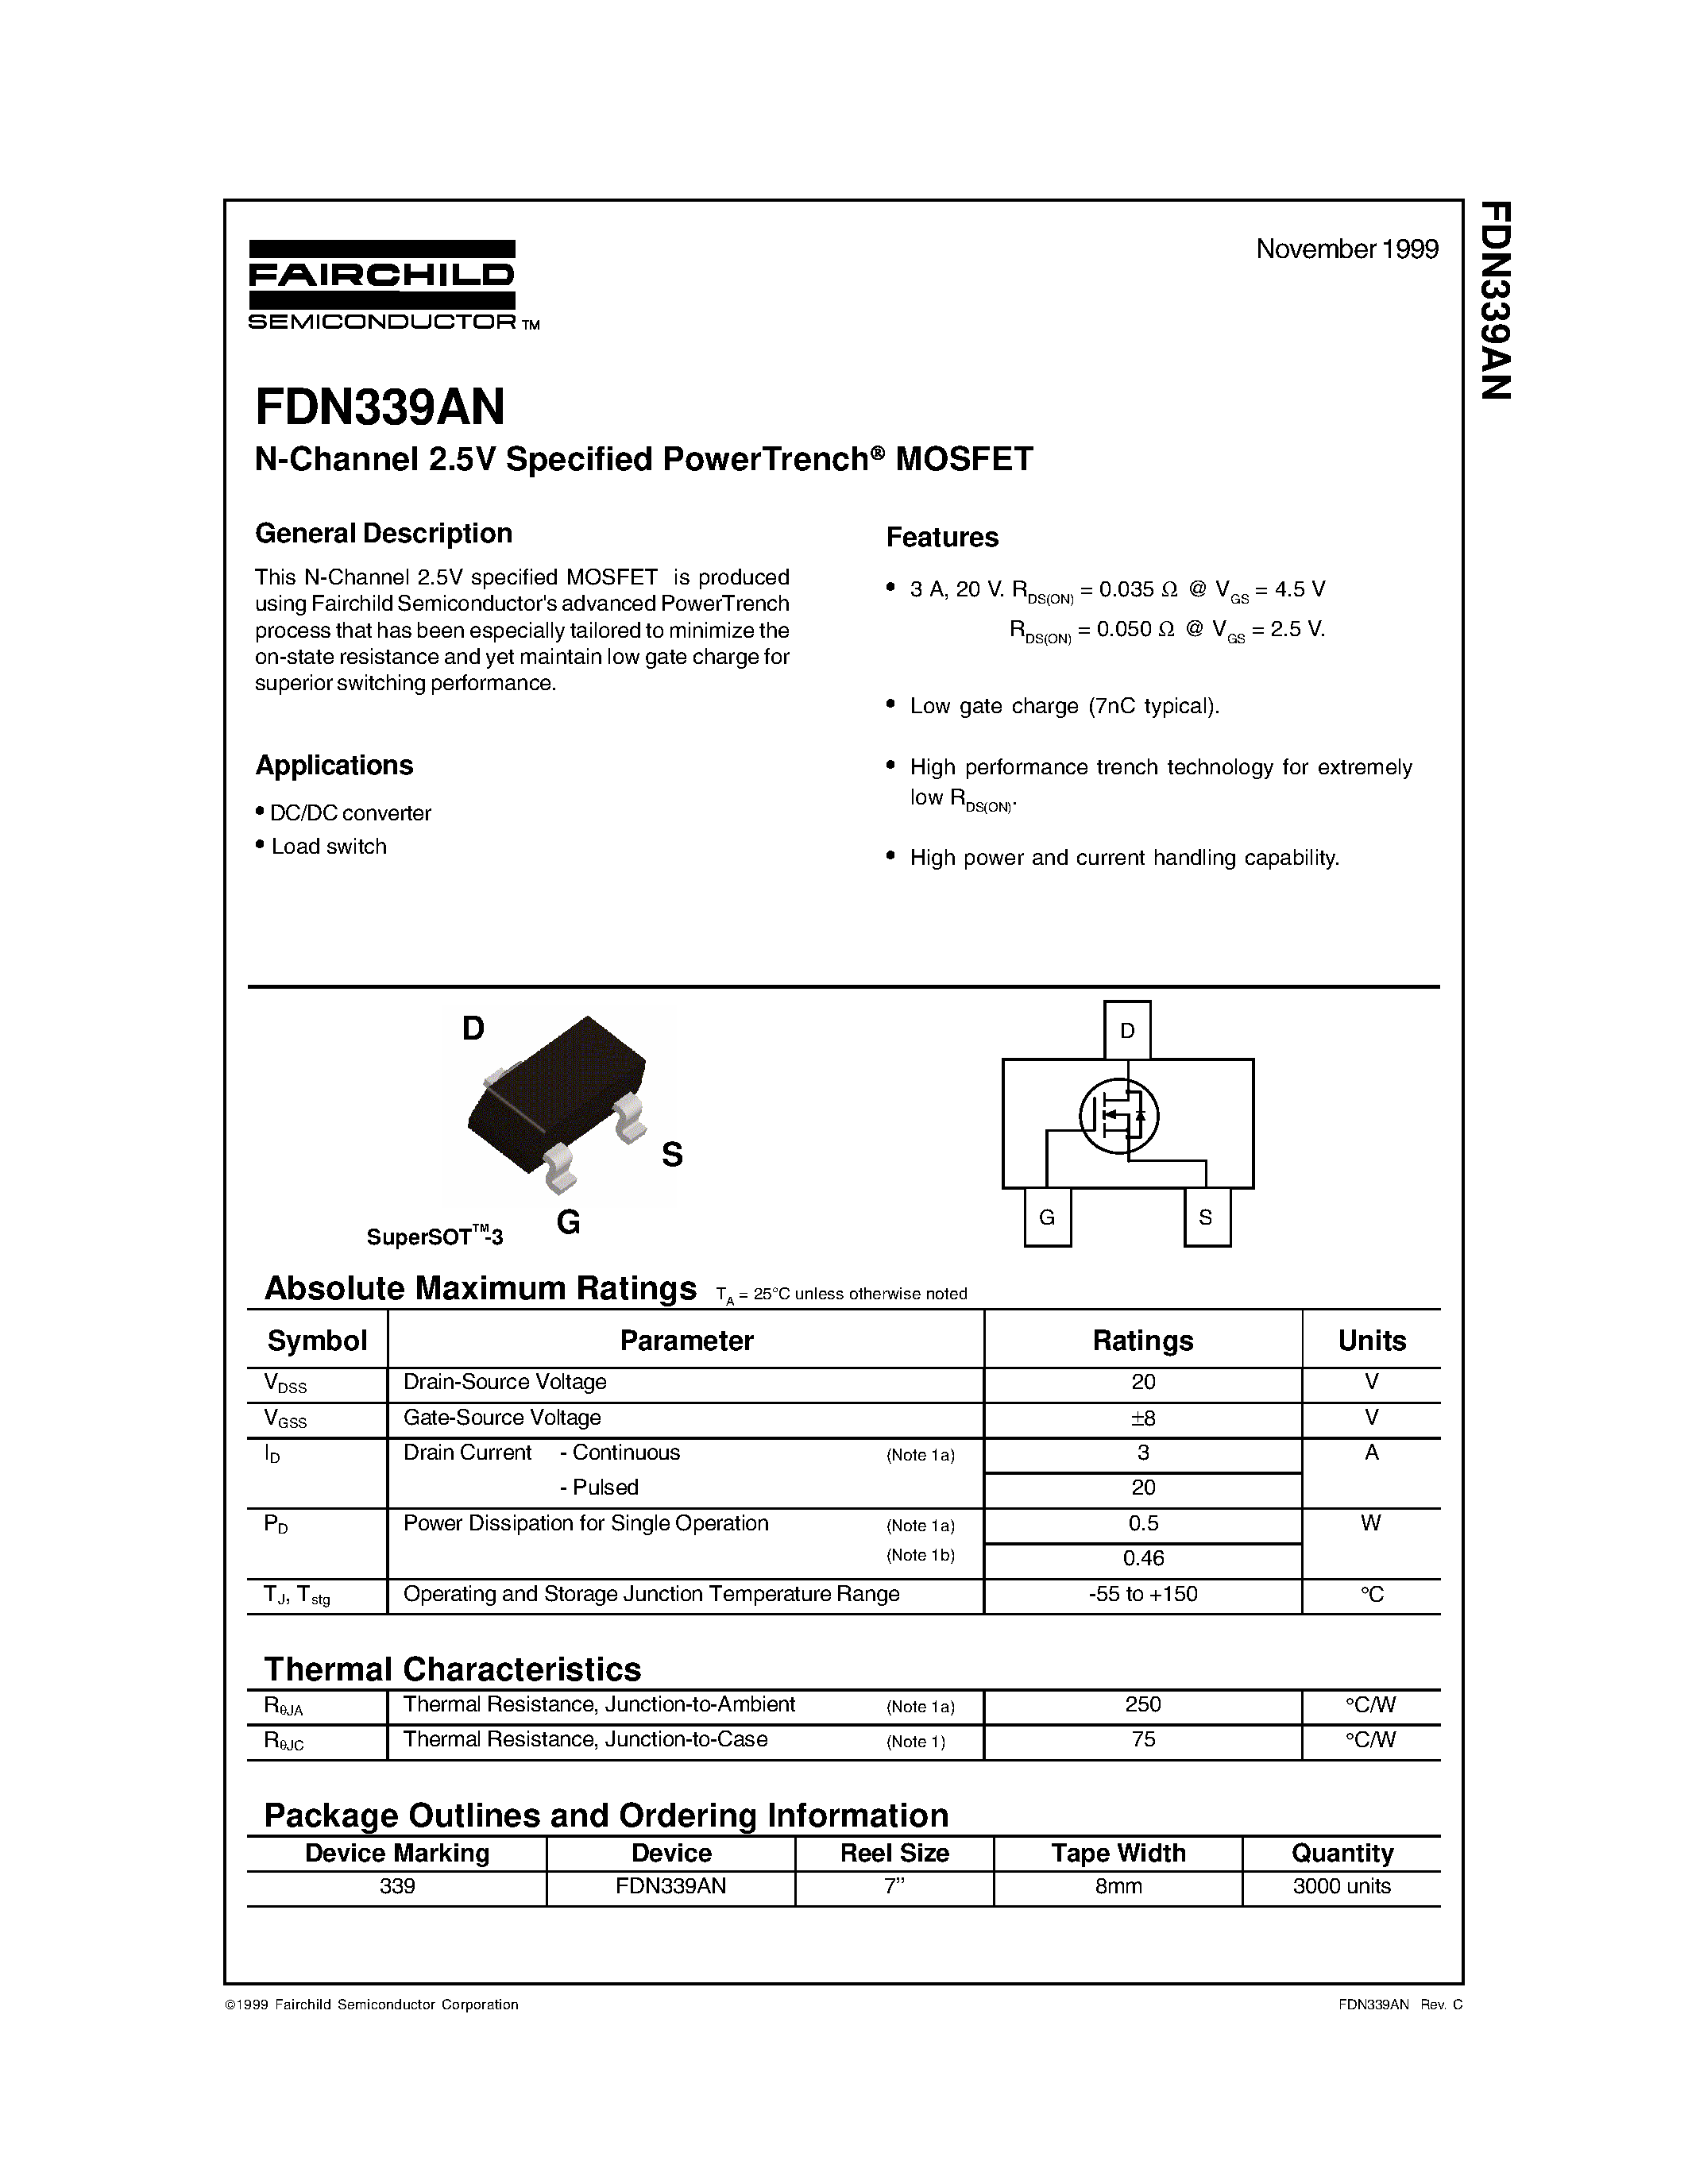 Даташит FDN339AN - N-Channel 2.5V Specified PowerTrench MOSFET страница 1